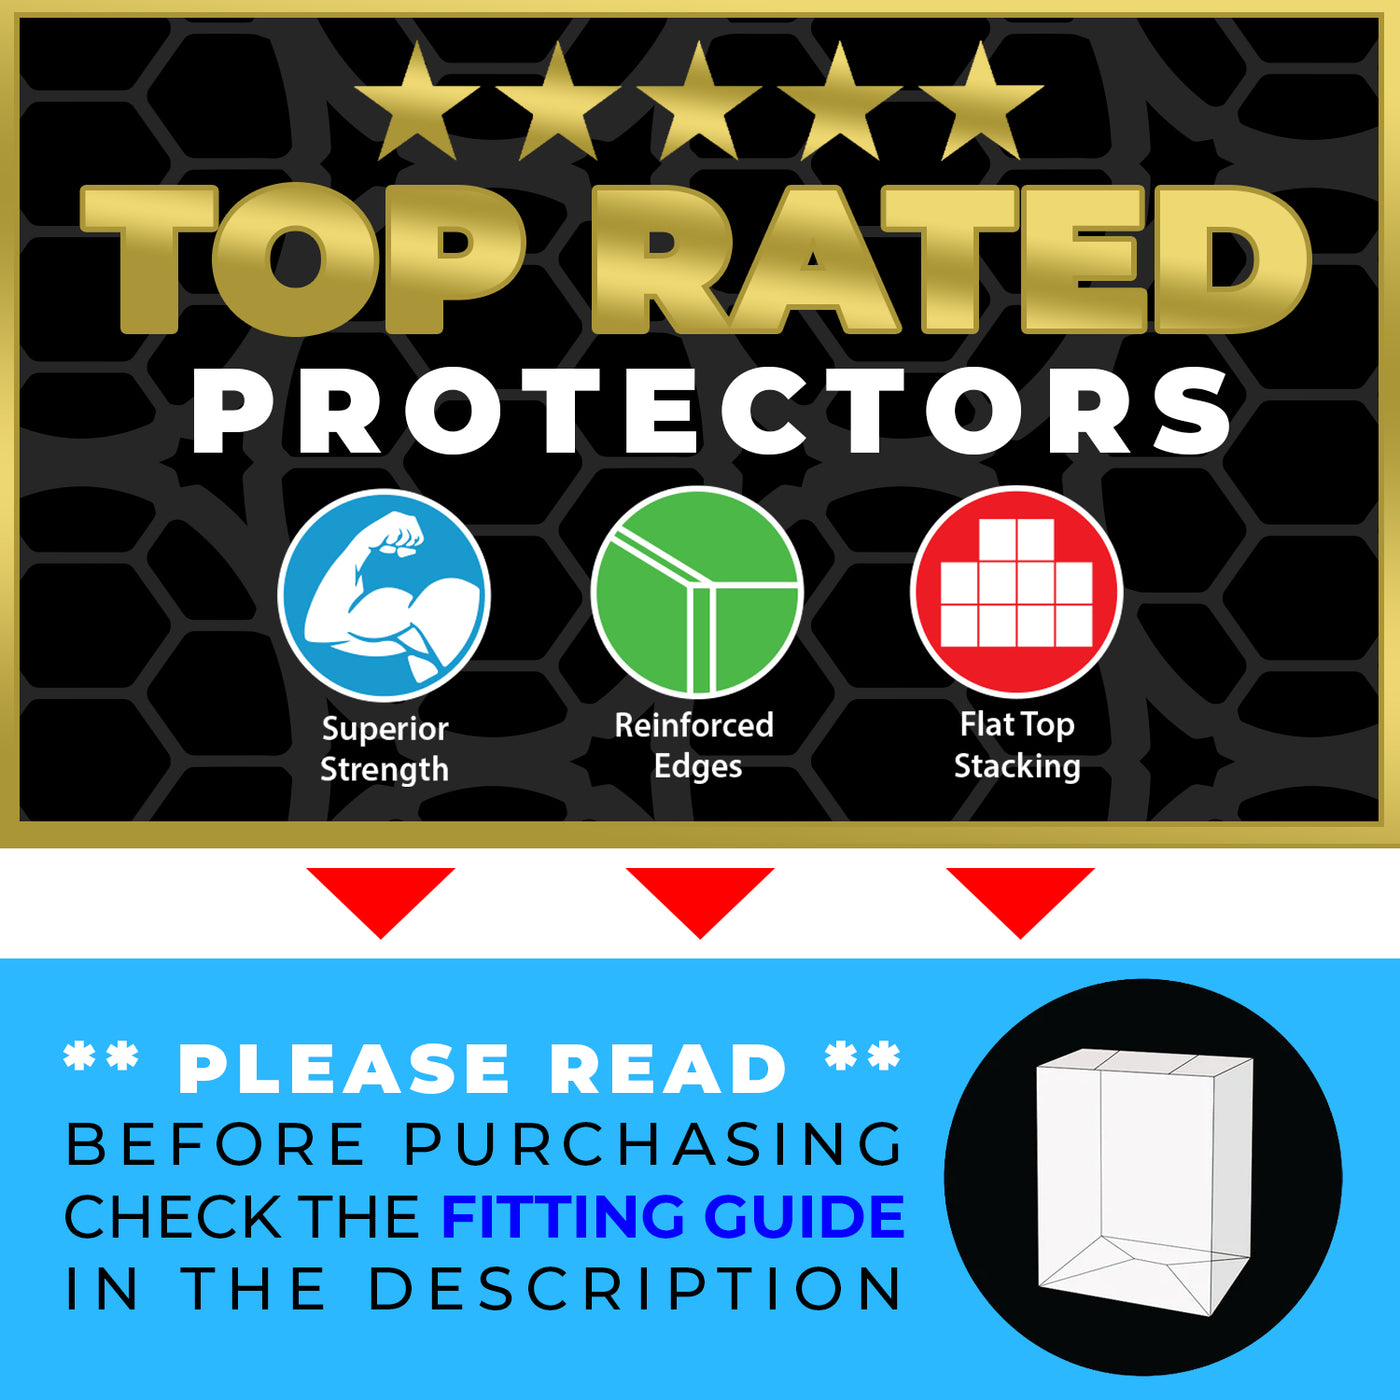 dc jim lee batman hush pop deluxe best funko pop protectors thick strong uv scratch flat top stack vinyl display geek plastic shield vaulted eco armor fits collect protect display case kollector protector